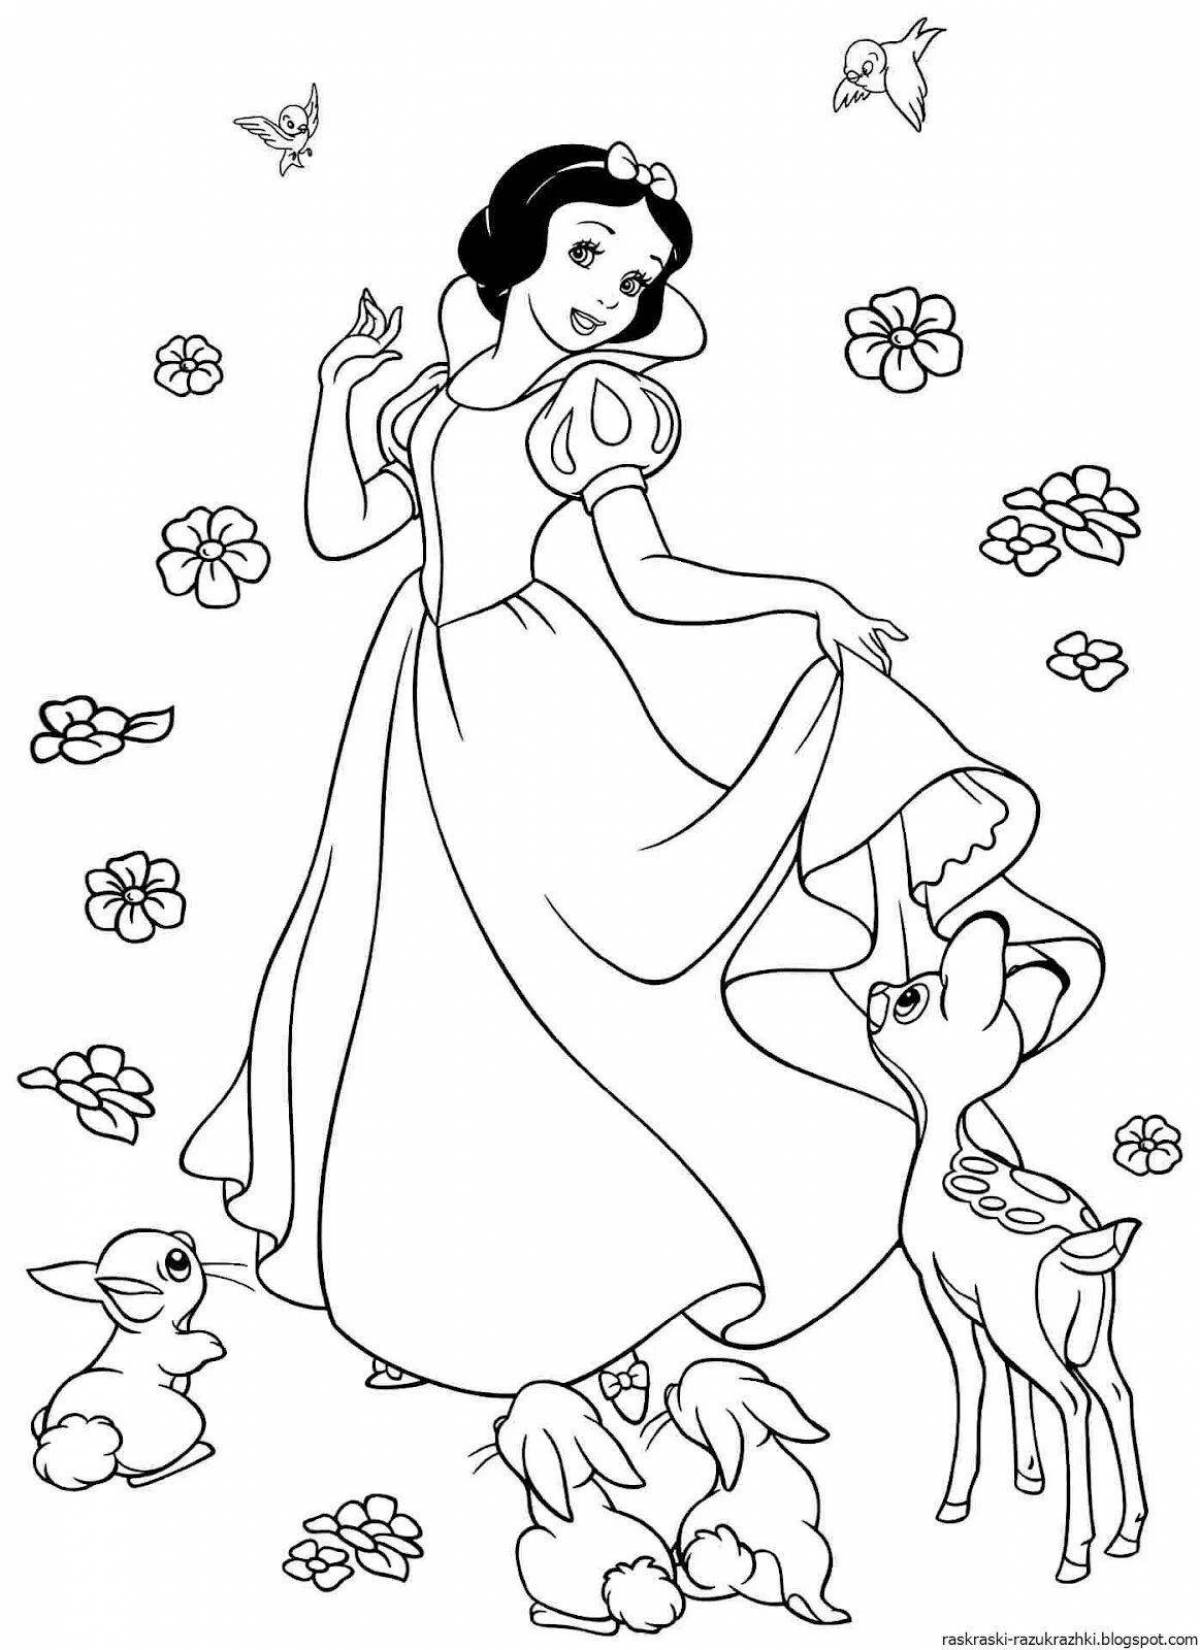 Adorable snow white coloring book for kids